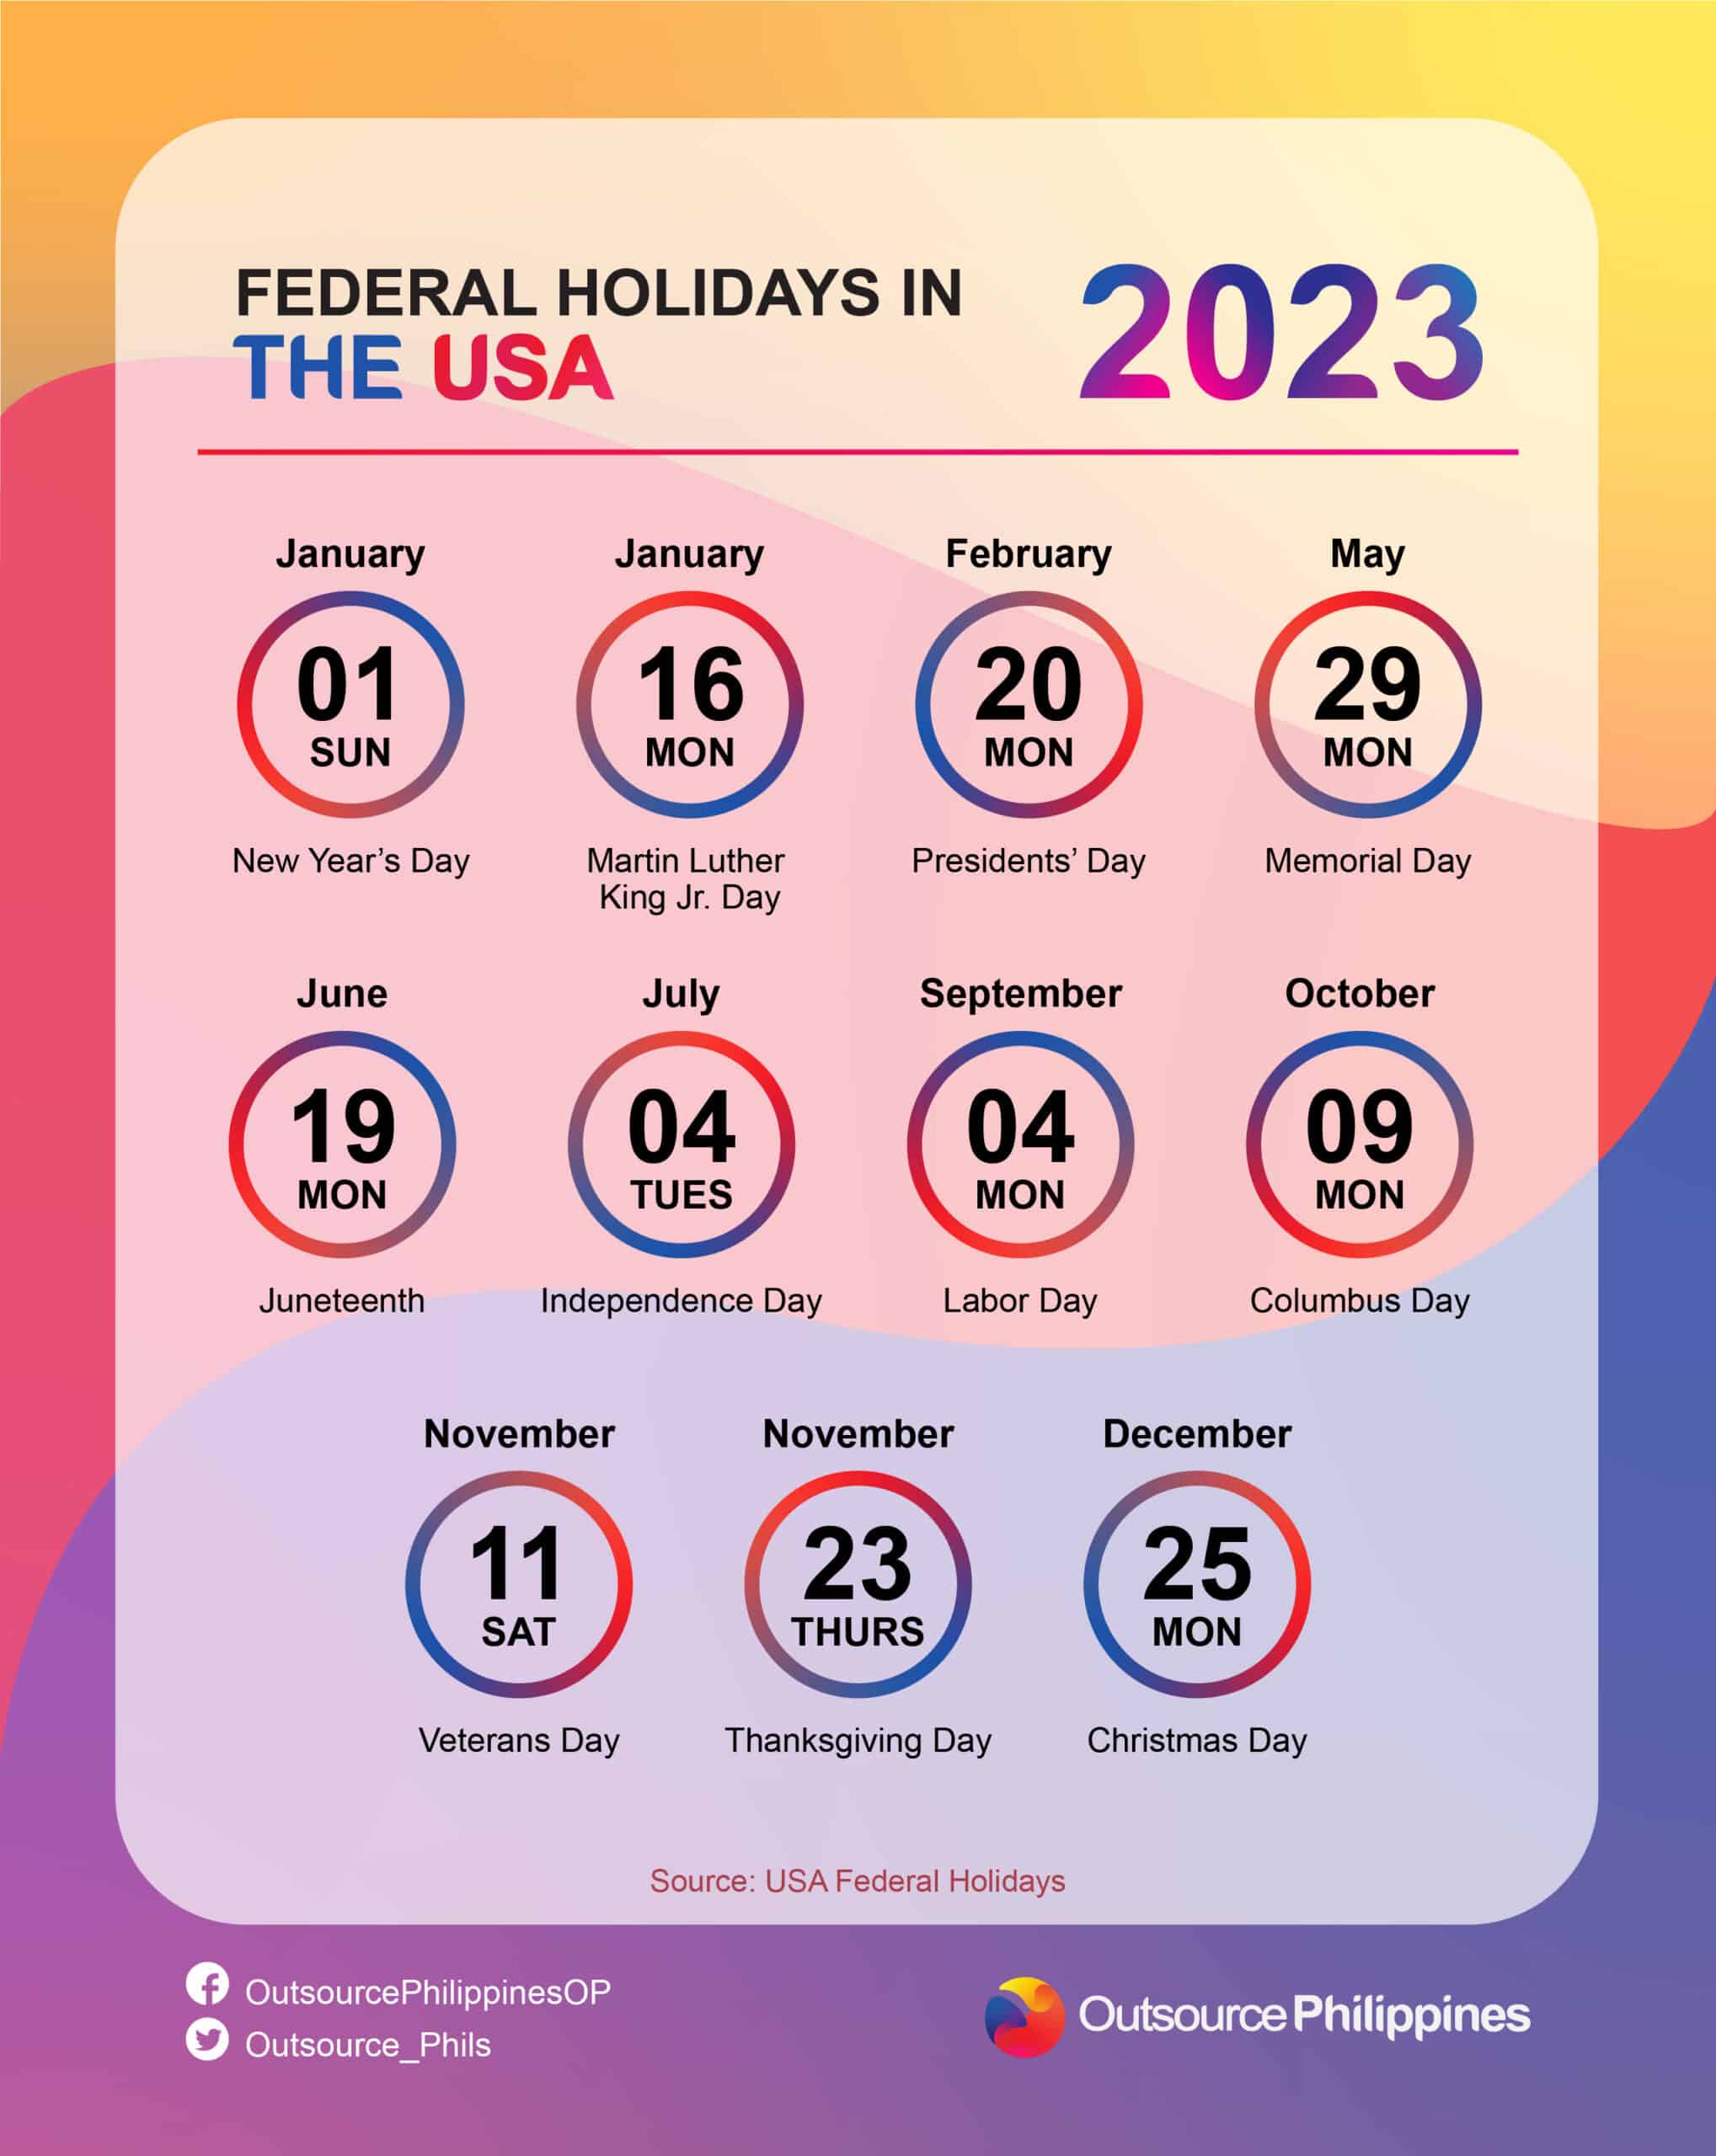 Outsource-Philippines infographics for the list of federalholidays in the USA for 2023